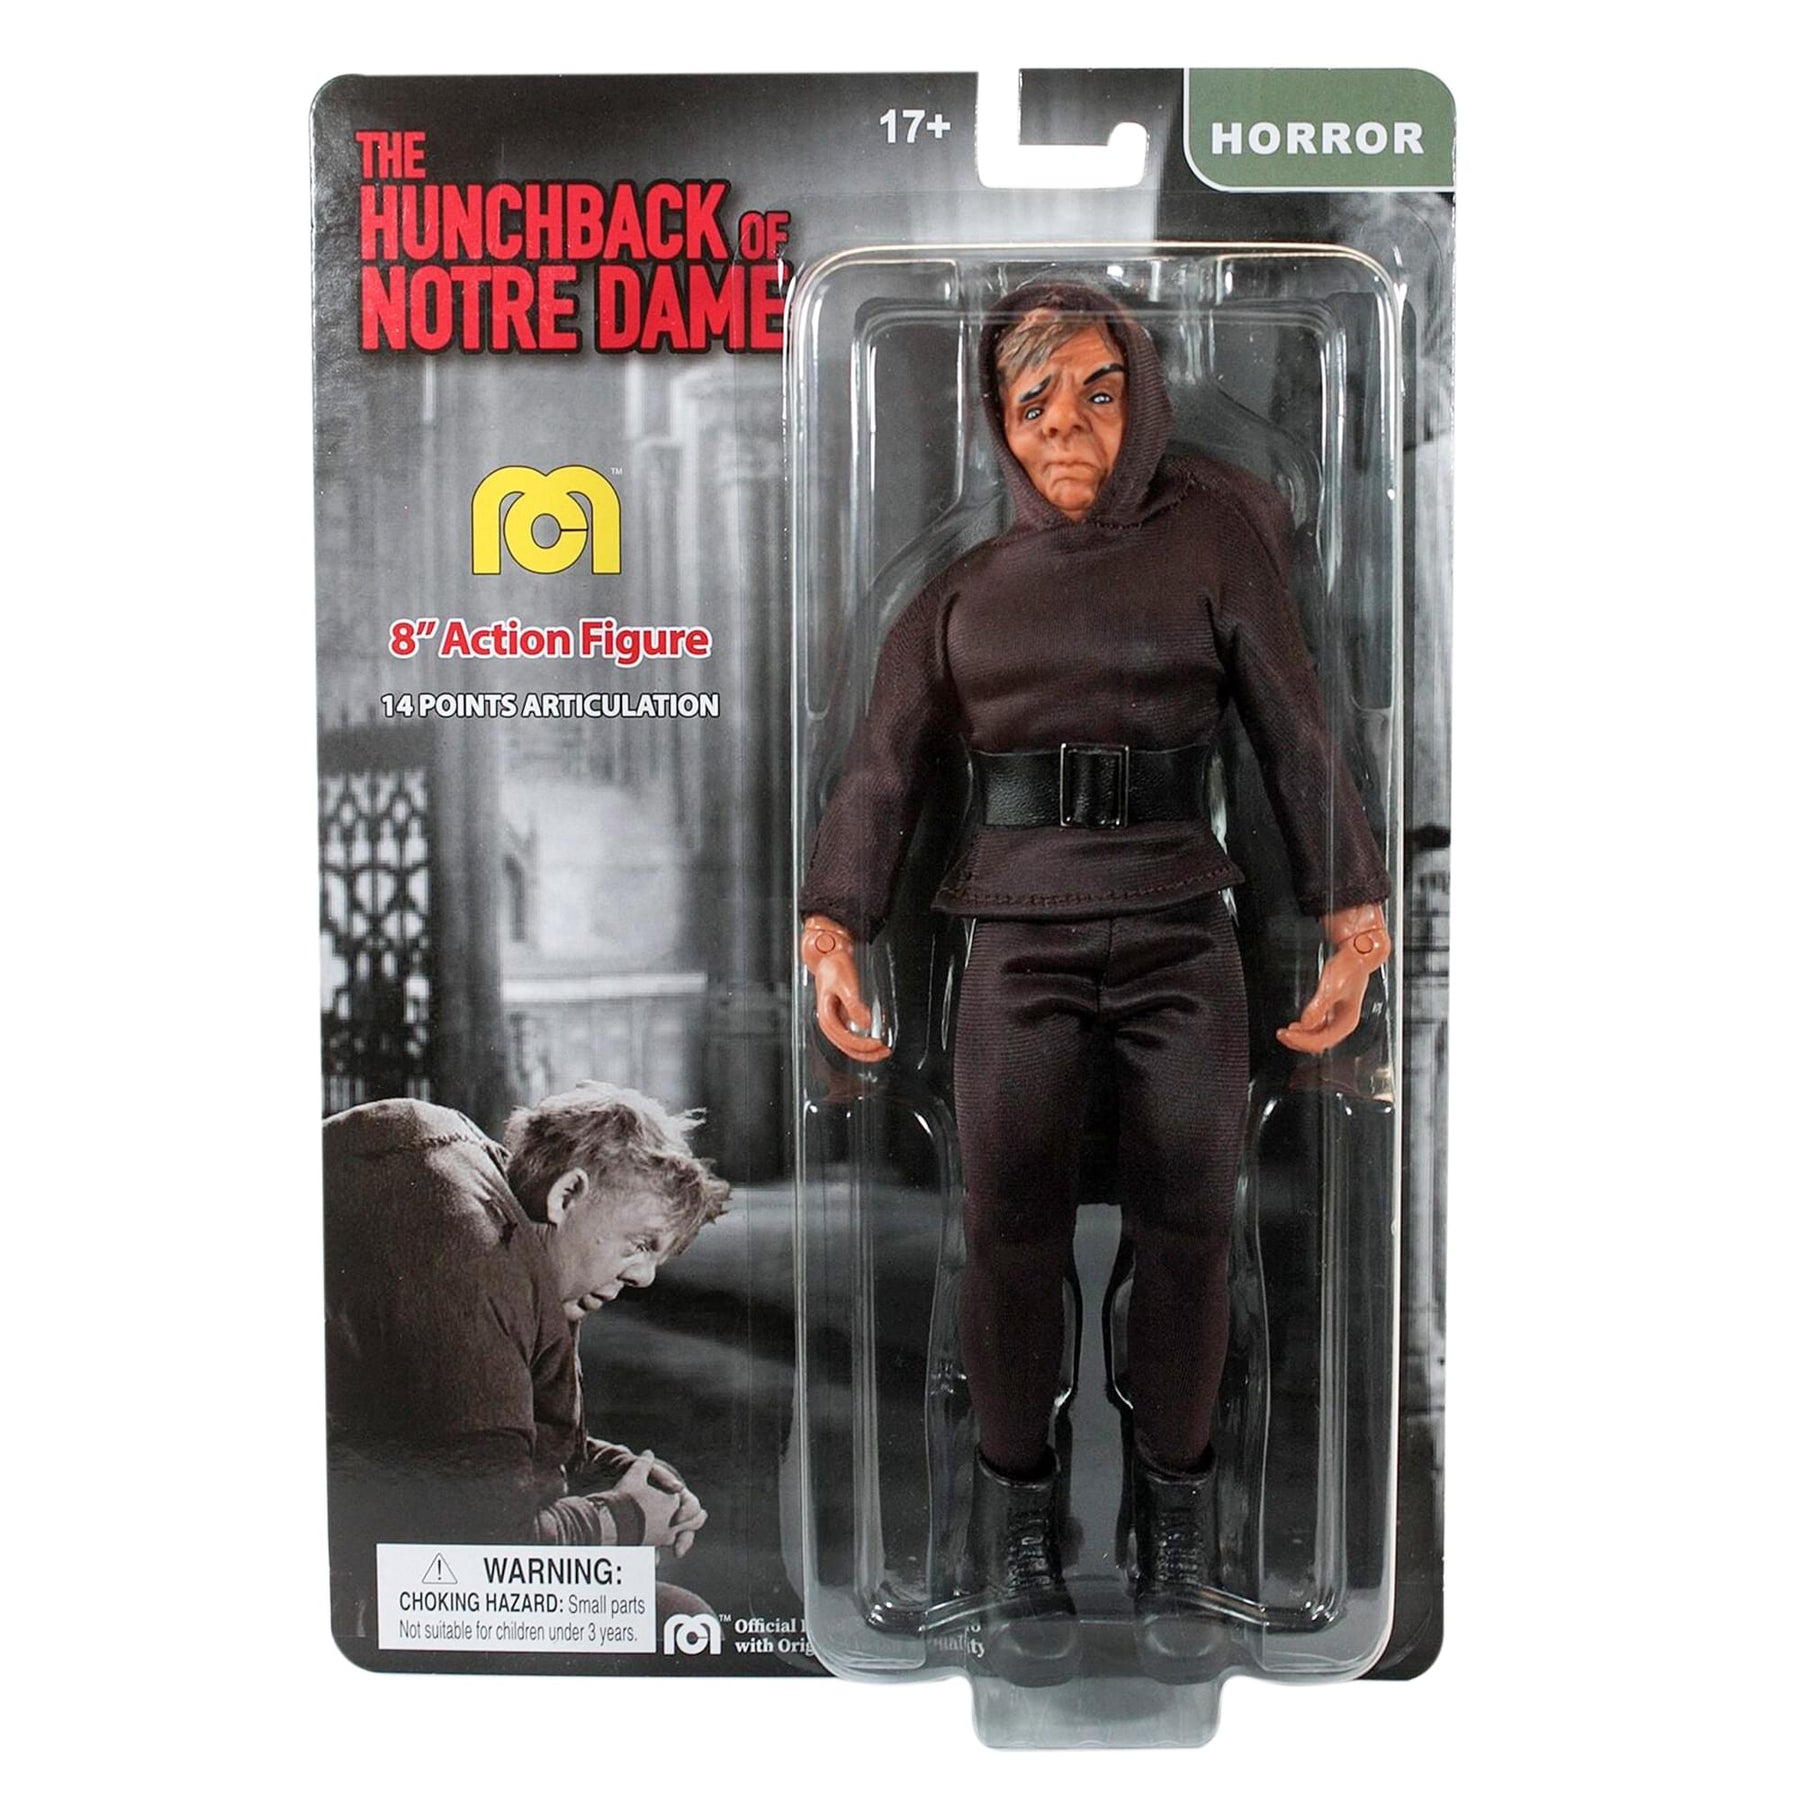 Mego Universal Monsters Hunchback of Notre Dame 8 Inch Action Figure